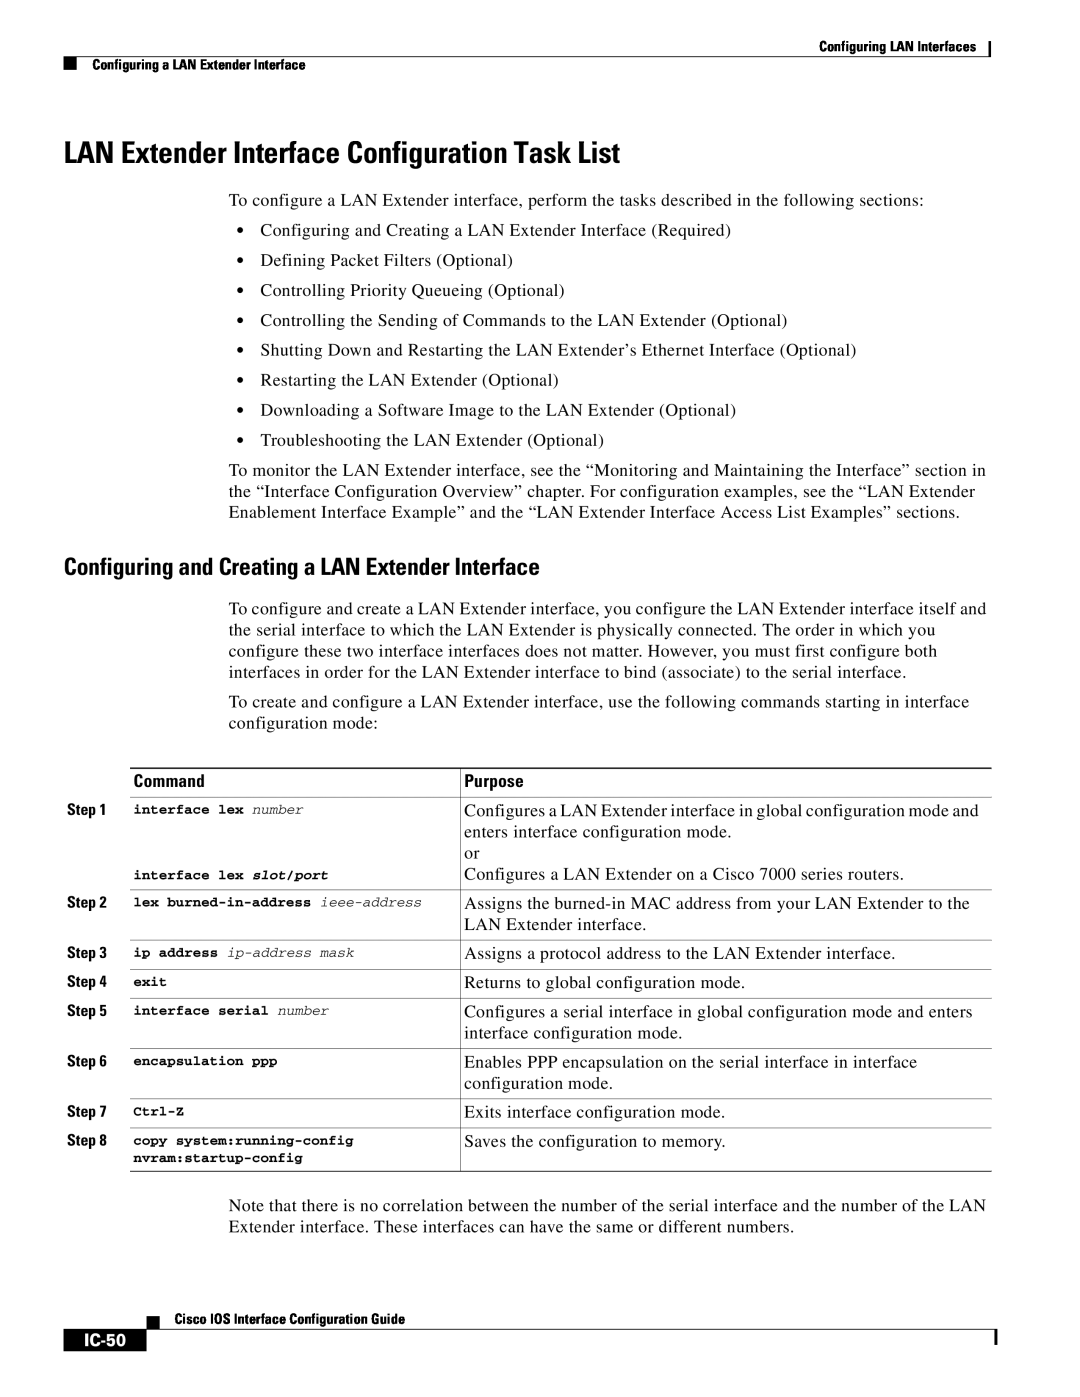 Cisco Systems IC-23 LAN Extender Interface Configuration Task List, Configuring and Creating a LAN Extender Interface 